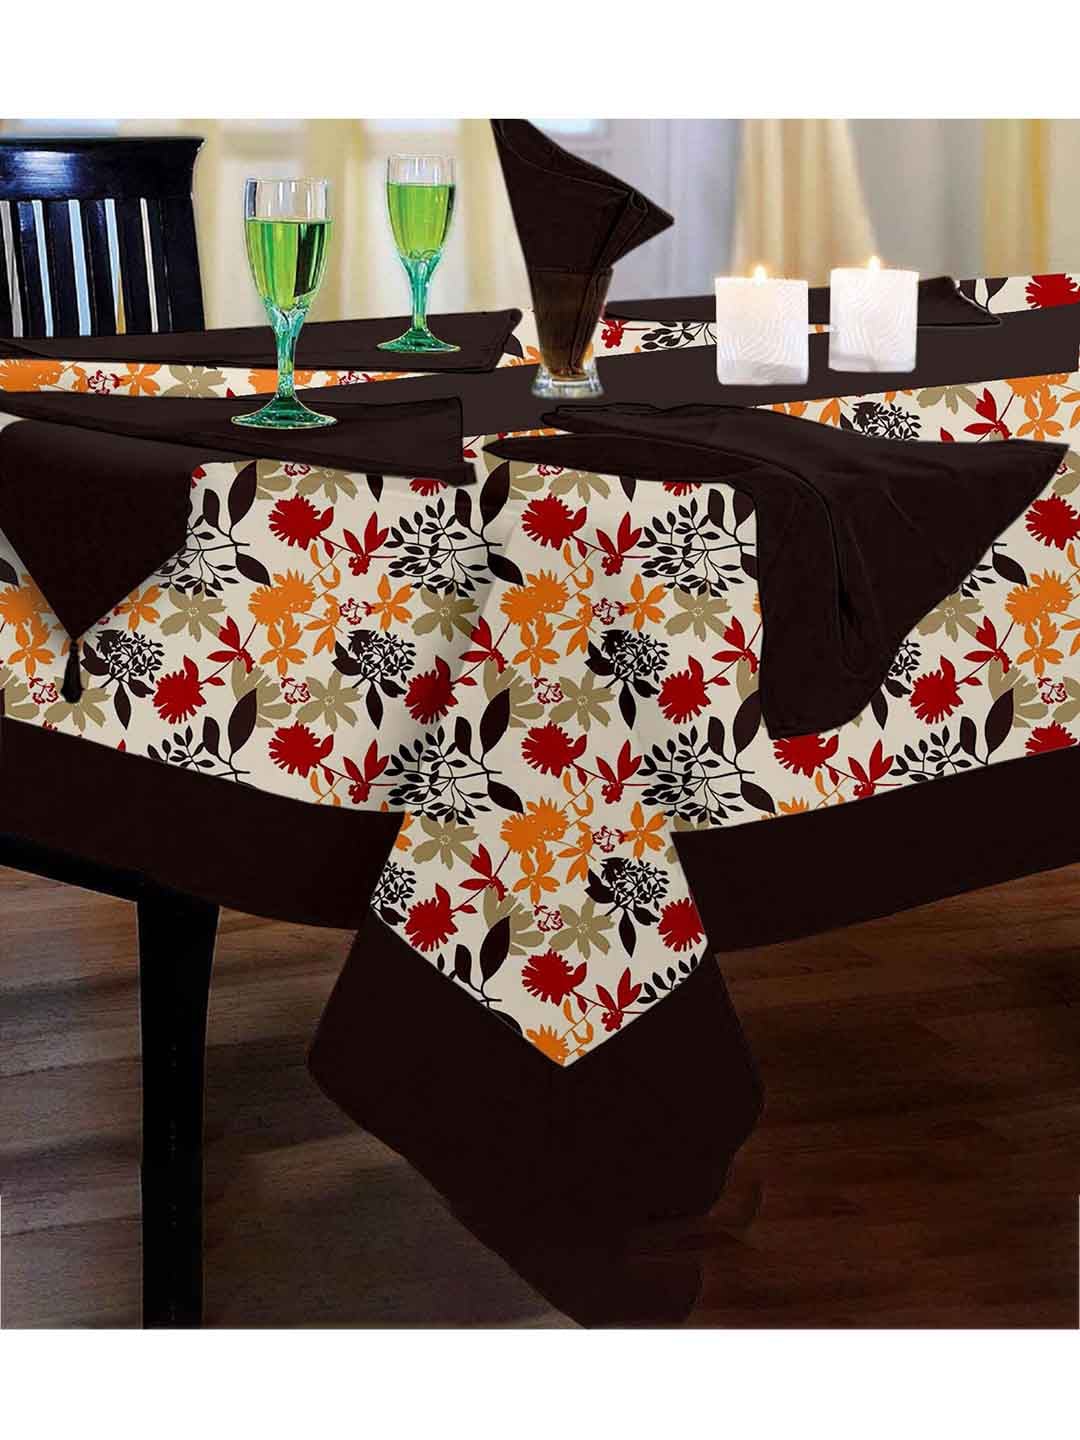 Lushomes Multi 6 Printed Seater Table Set 1 Table Cloth+1 Runner+6 Napkins- Set of 8 Price in India